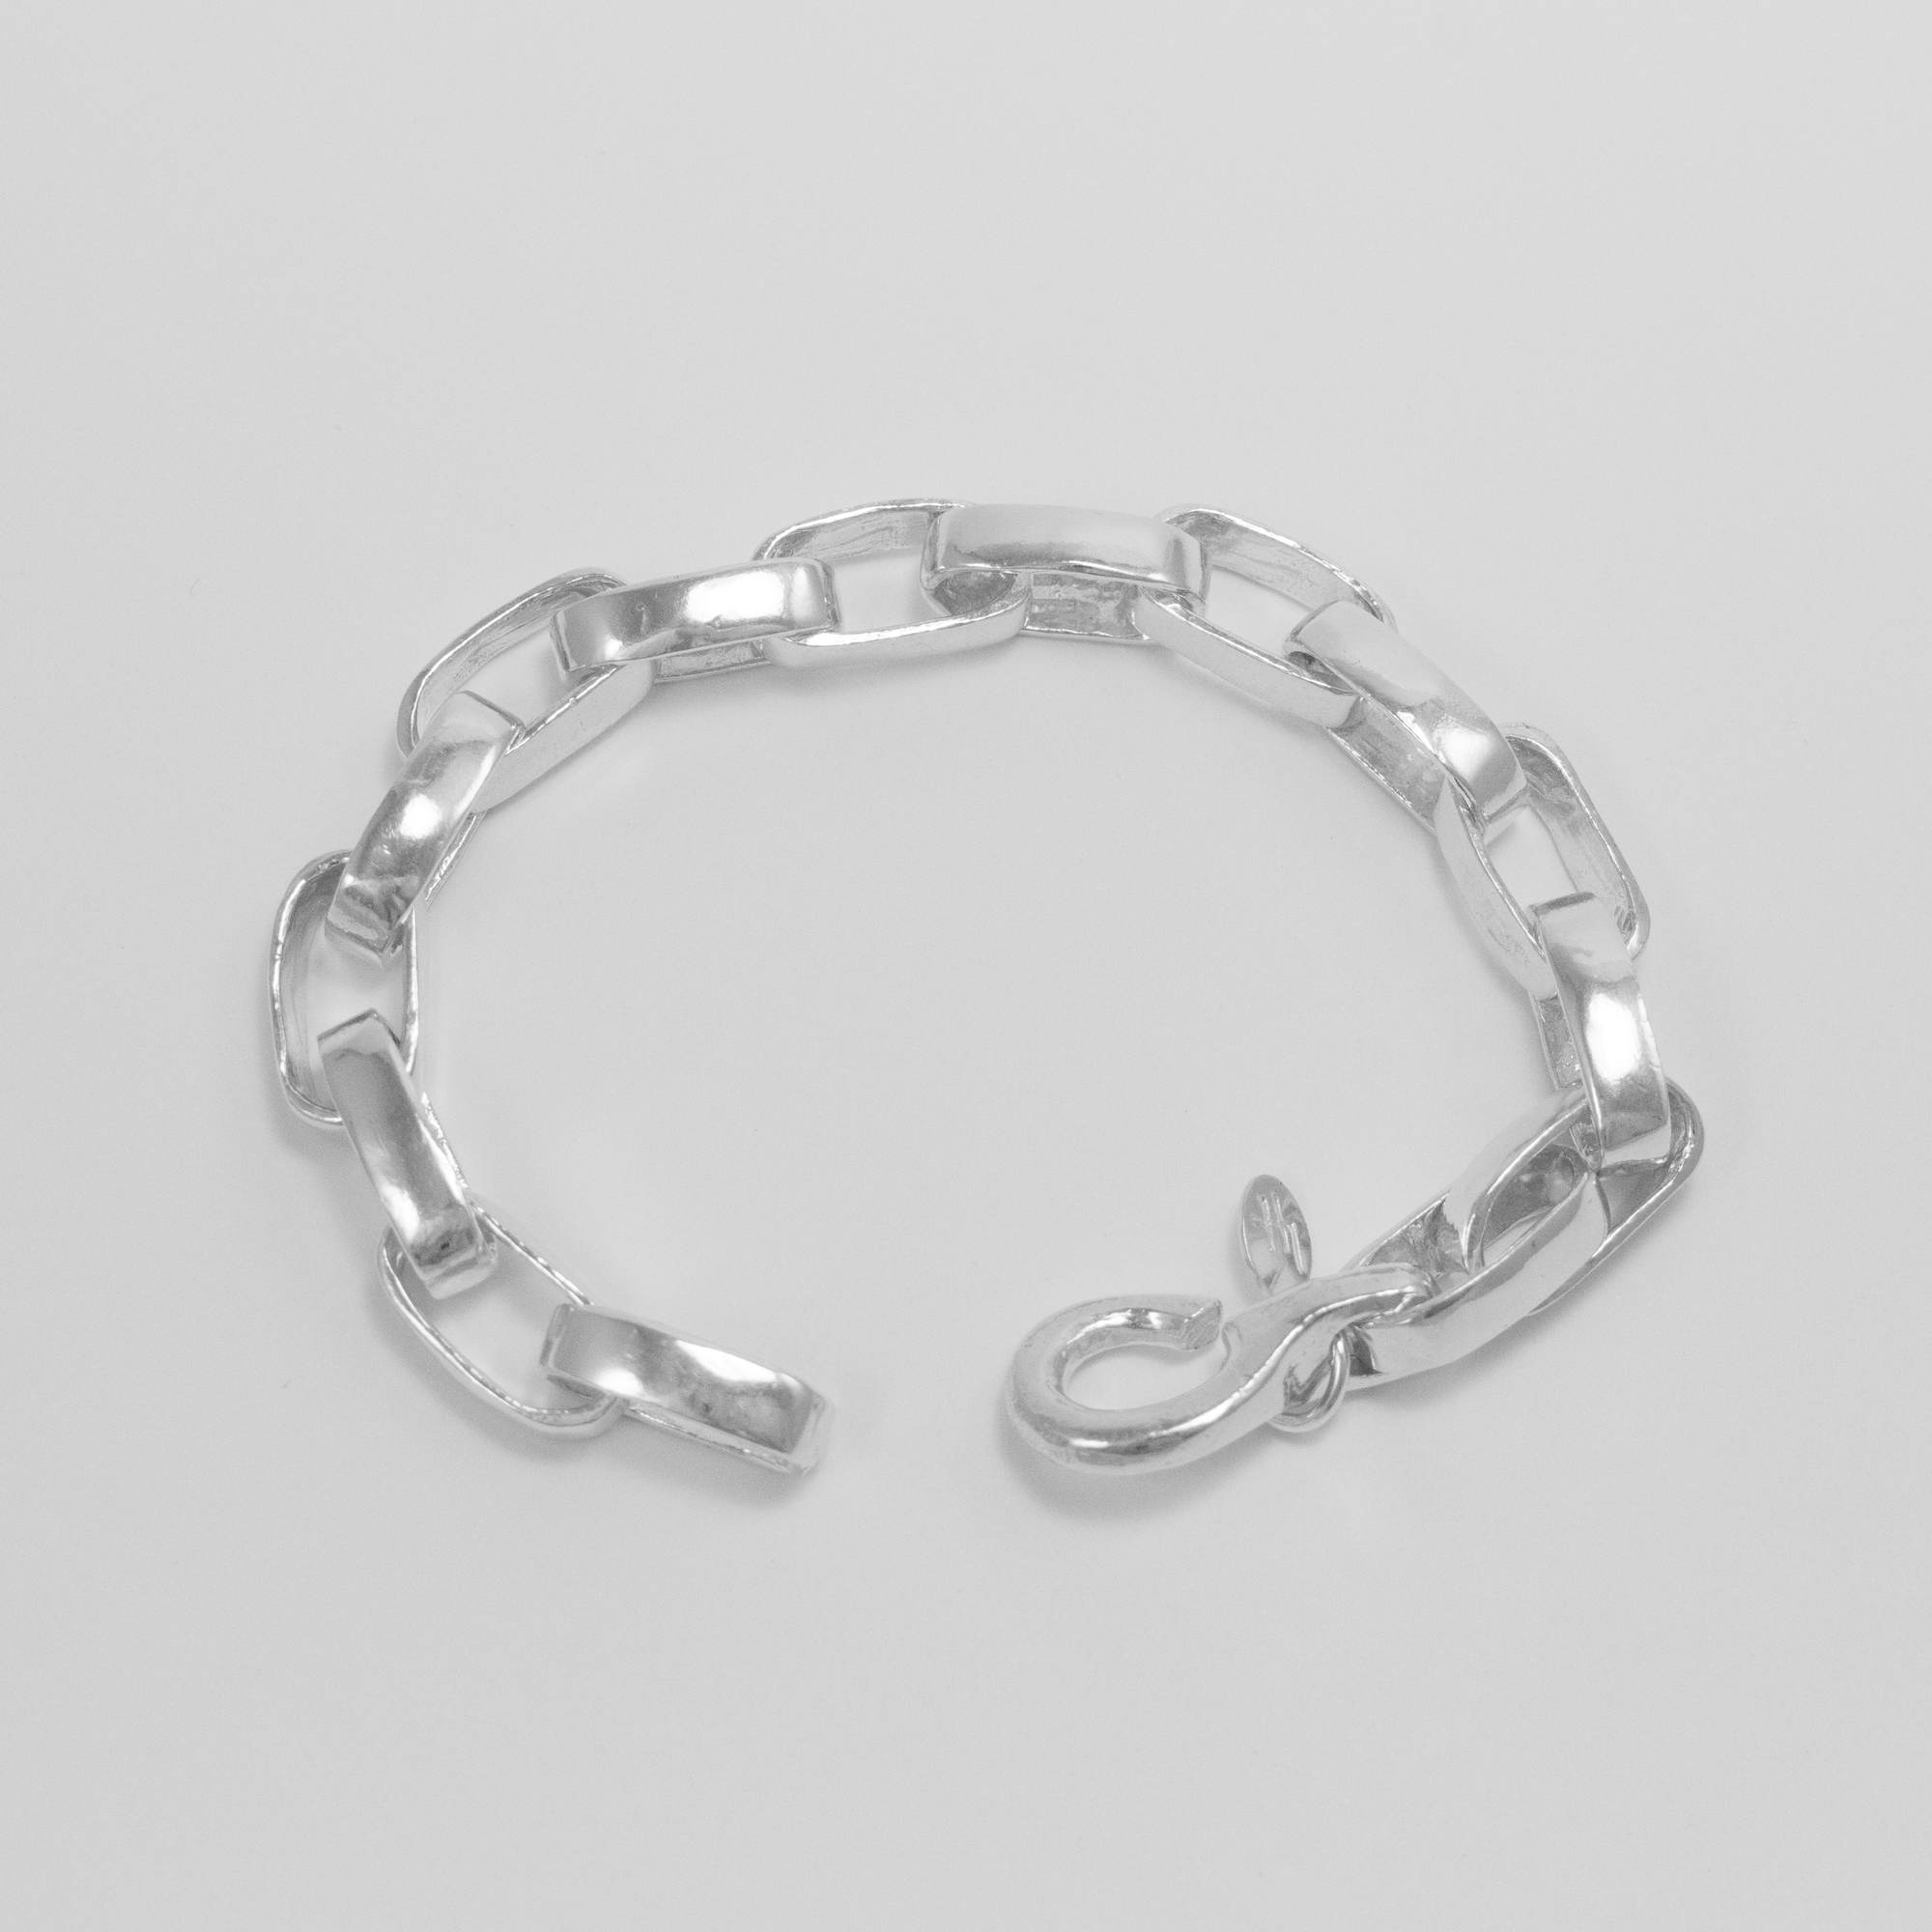 A product shot with minimal background showing the cast links of the Greta Bracelet, as well as the new cast hook clasp.